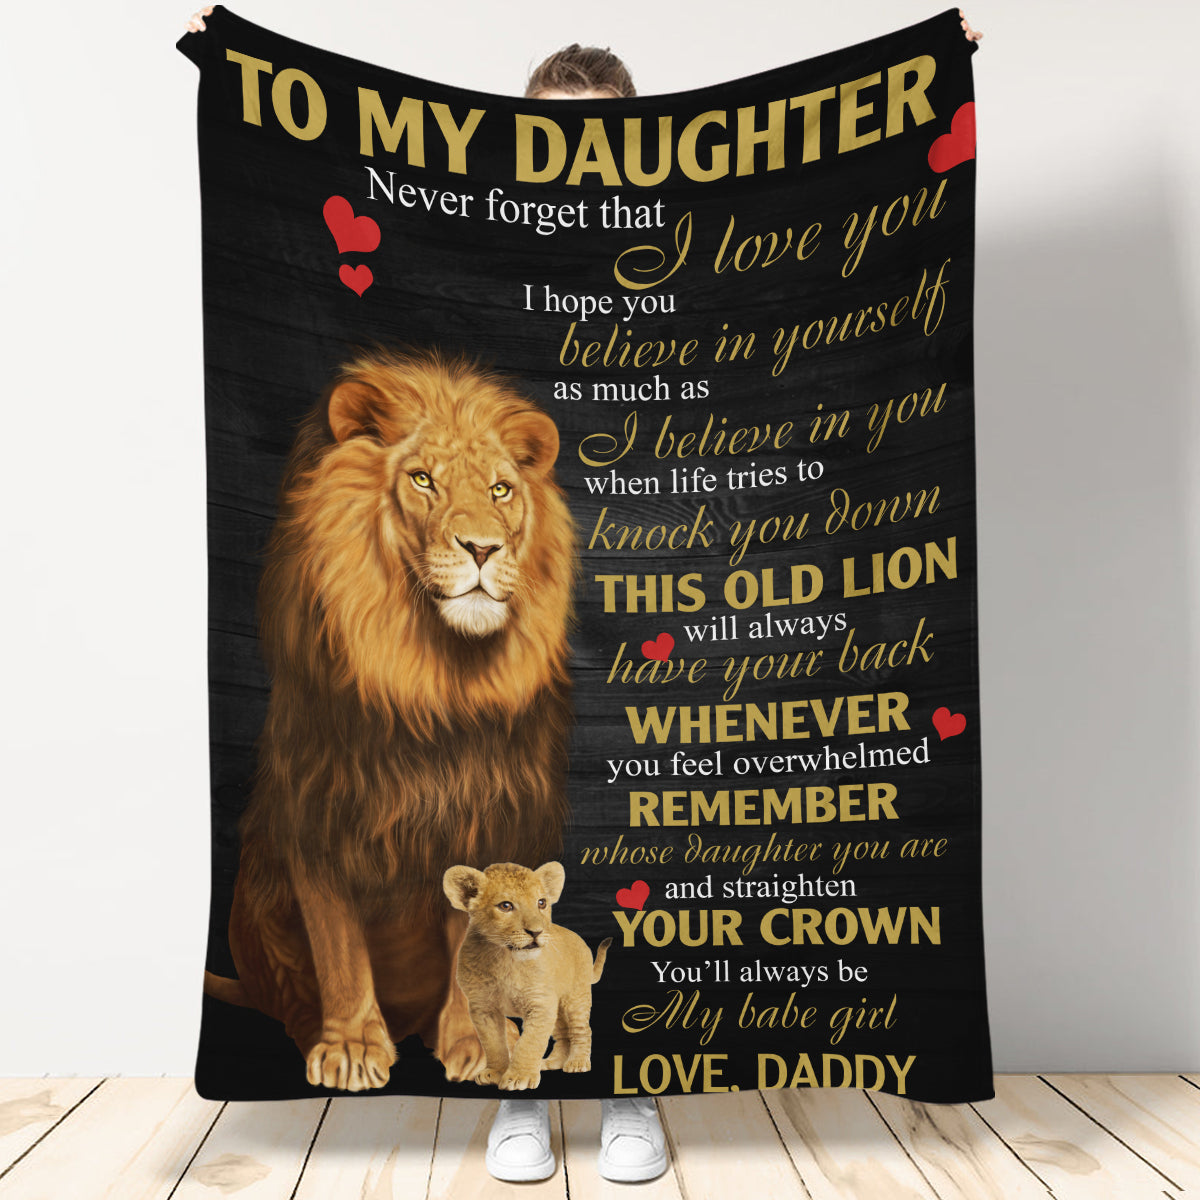 To My Daughter Never Forget That I Love You Fleece Blanket - Quilt Blanket, Gift For Daughter, Gift From Dad To Daughter, Home Decor Bedding Couch Sofa Soft And Comfy Cozy